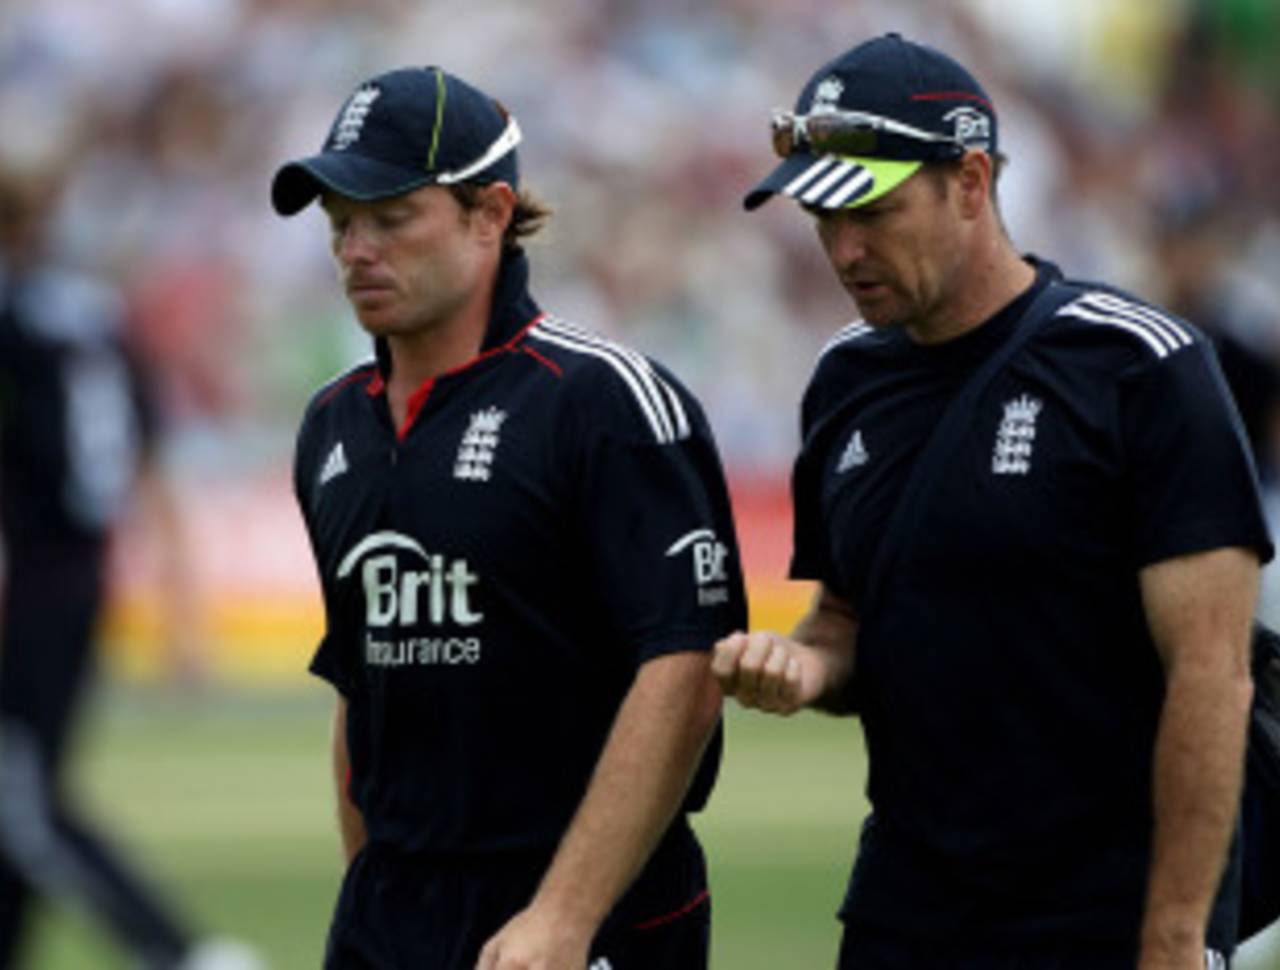 Ian Bell's injury could give an opportunity for Eoin Morgan in the Test side&nbsp;&nbsp;&bull;&nbsp;&nbsp;Getty Images